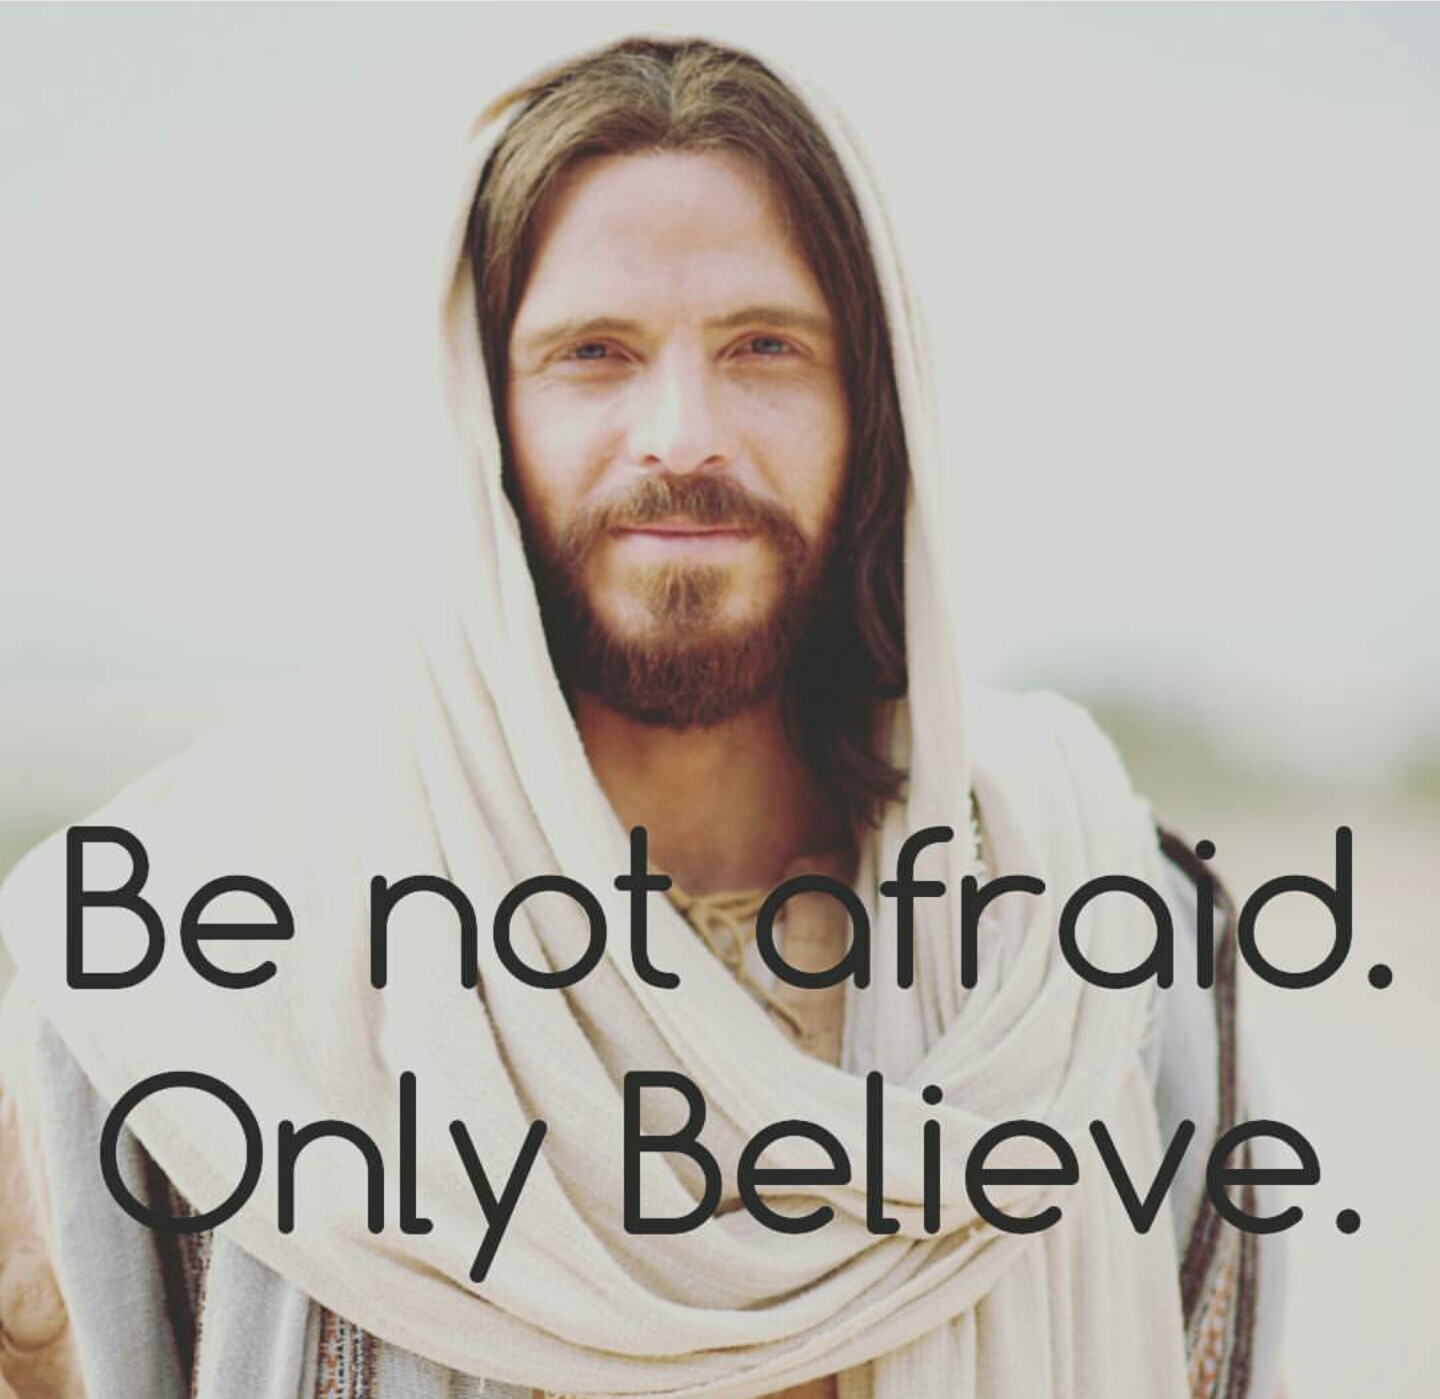 For.the.Love : Be not afraid. Only Believe.